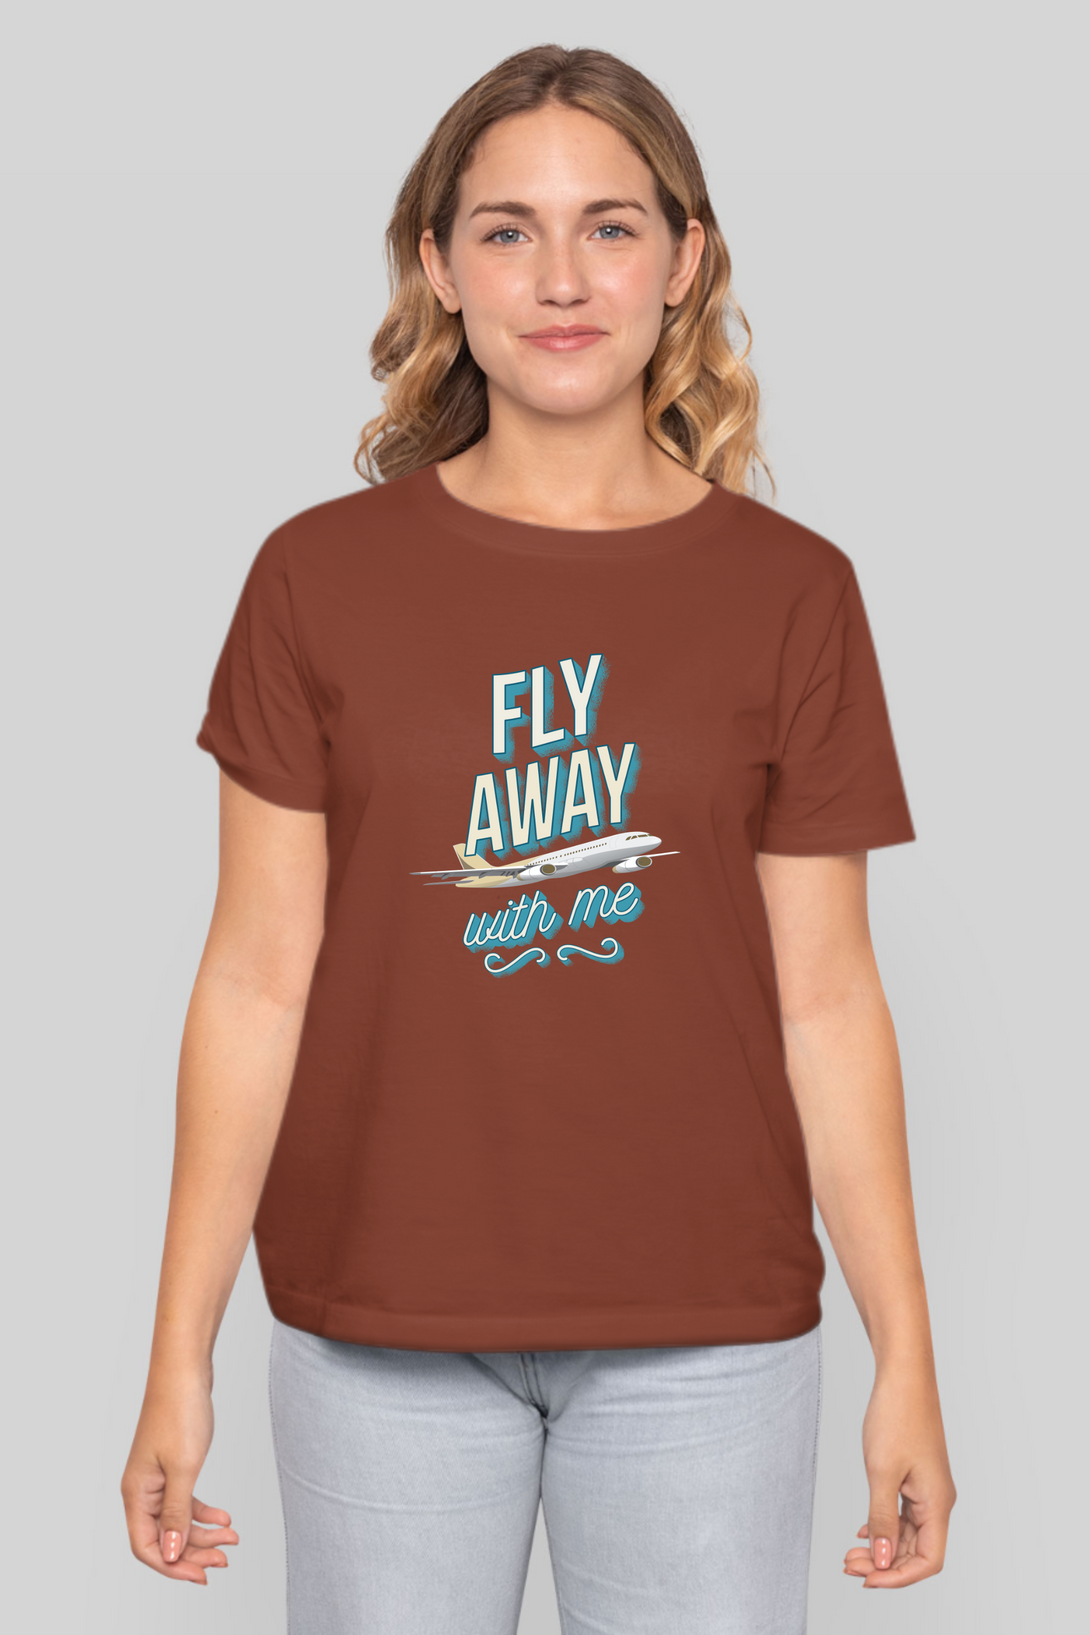 Fly Away With Me Printed T-Shirt For Women - WowWaves - 7